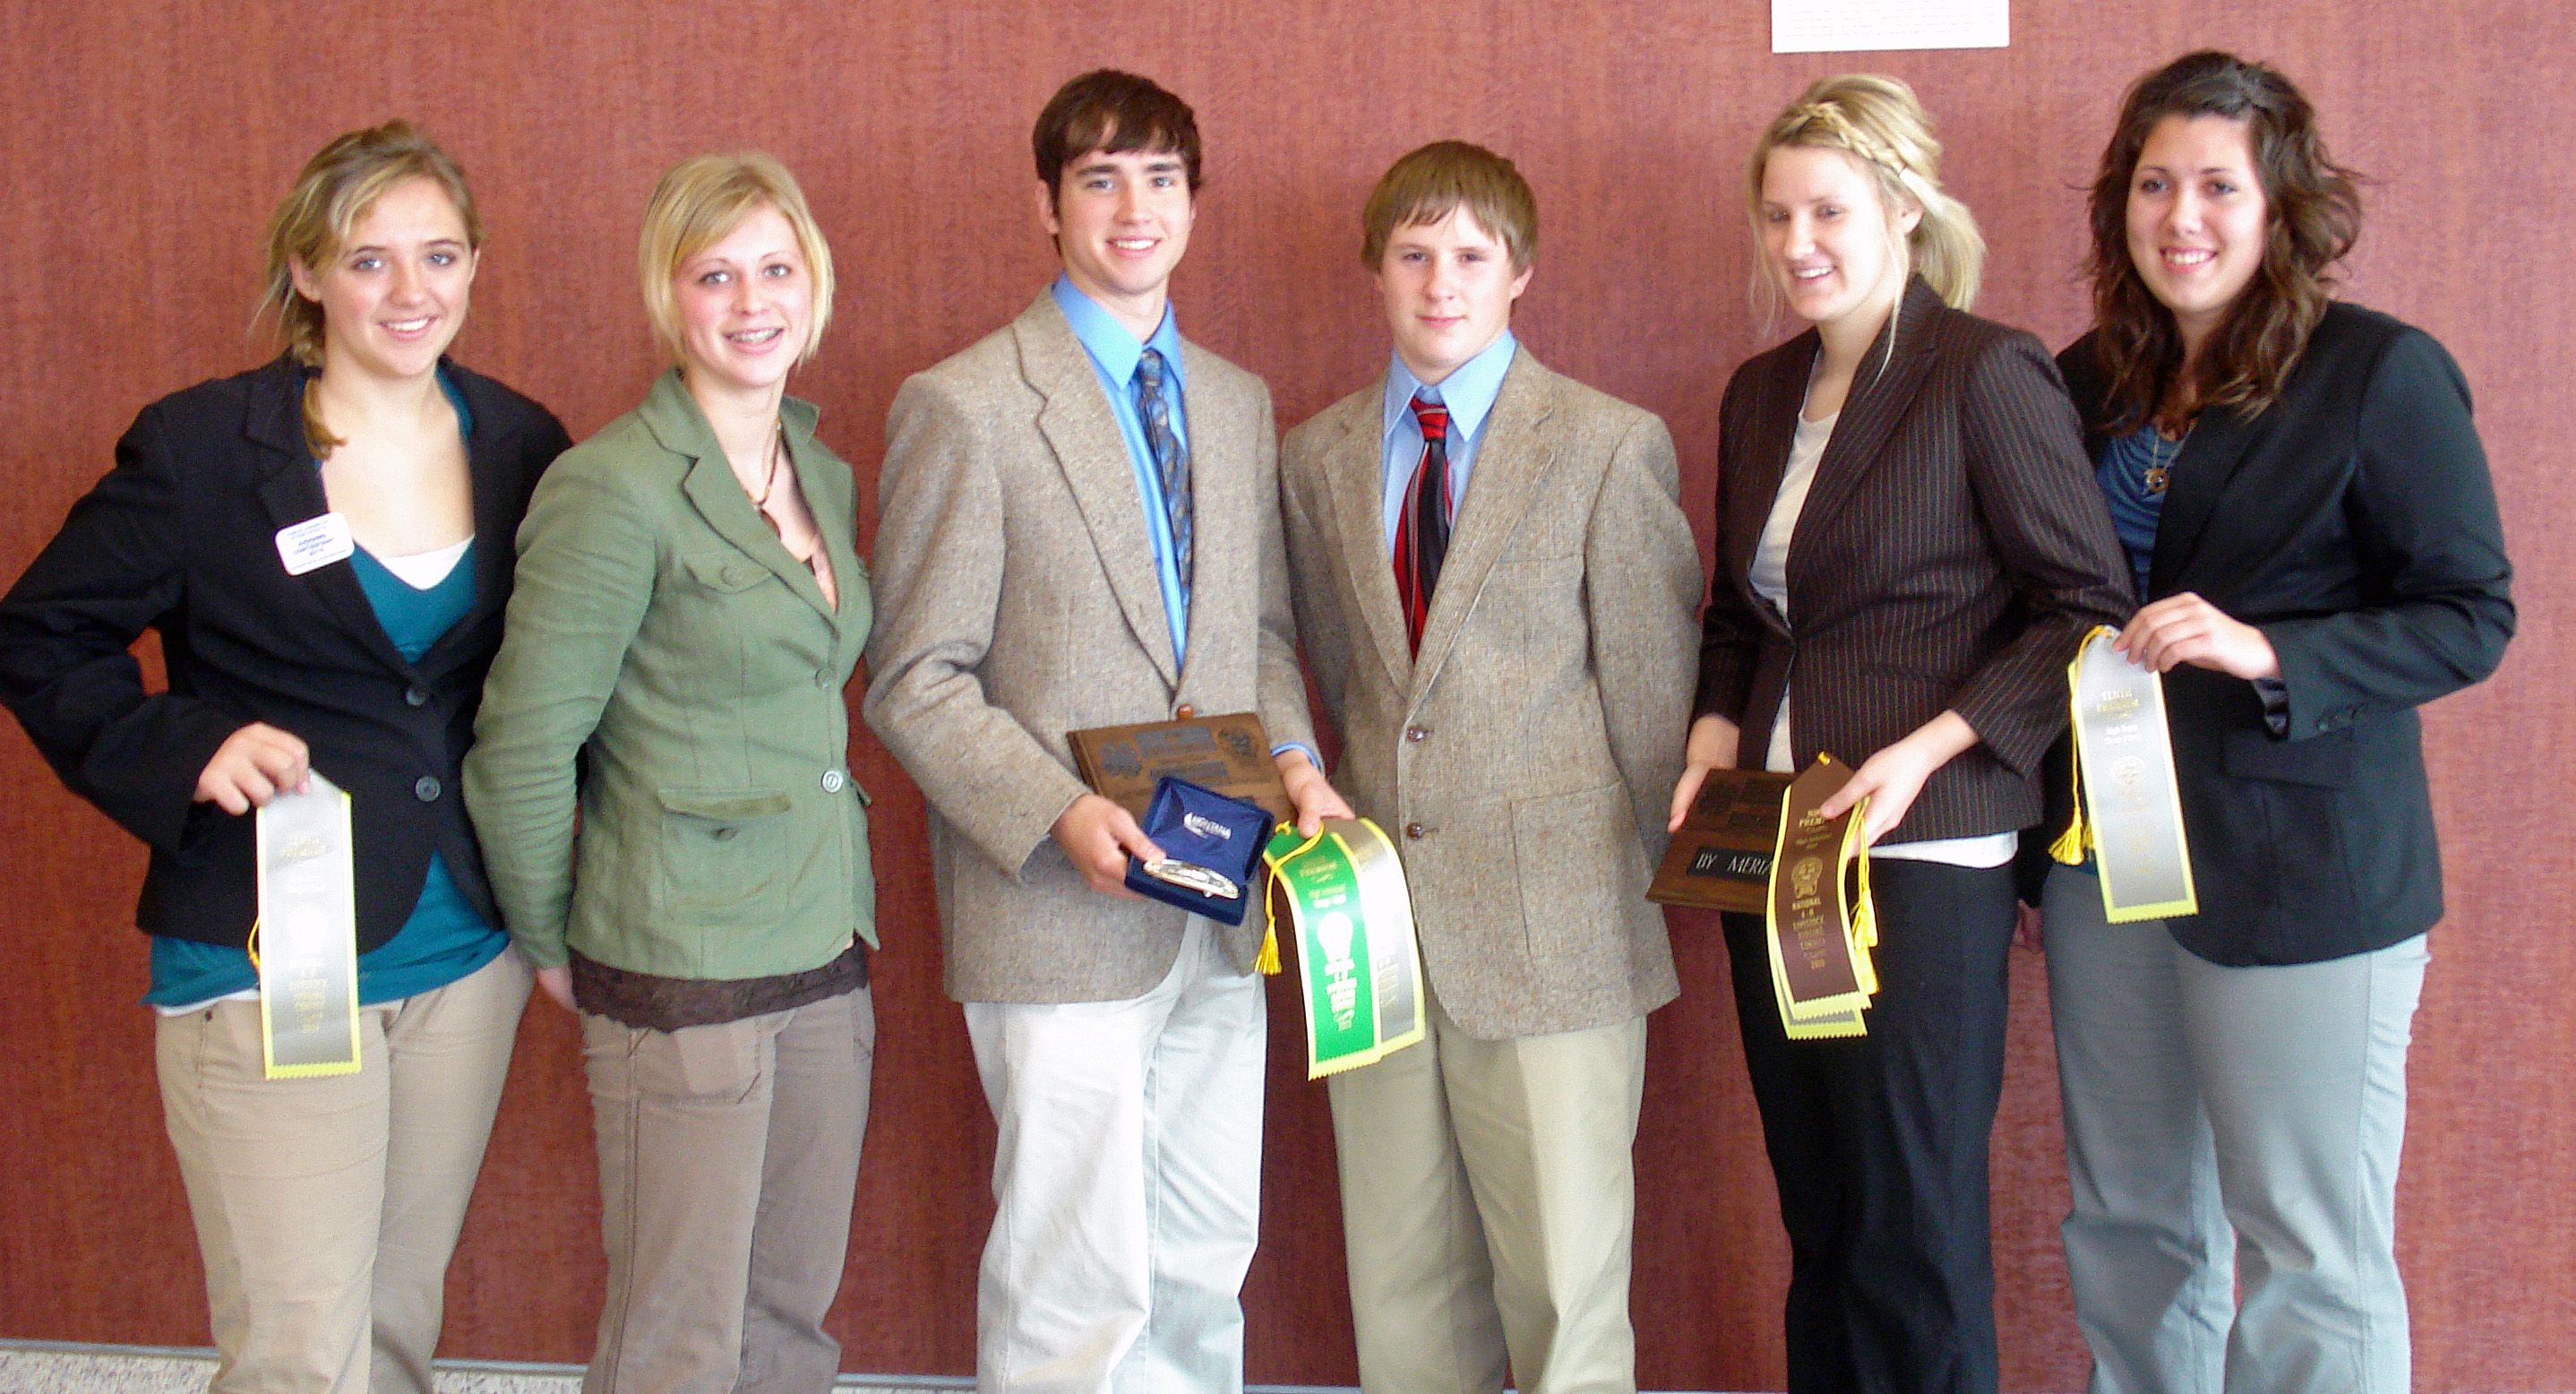 The Adams County 4-H Senior Livestock Judging Team brought home awards from competition in Kentucky. The team members are (left to right): Mariah Brooks, Hannah Nordby, Nick Germann, Ben Pearson, Alix Pearson and Nicole Johnson.